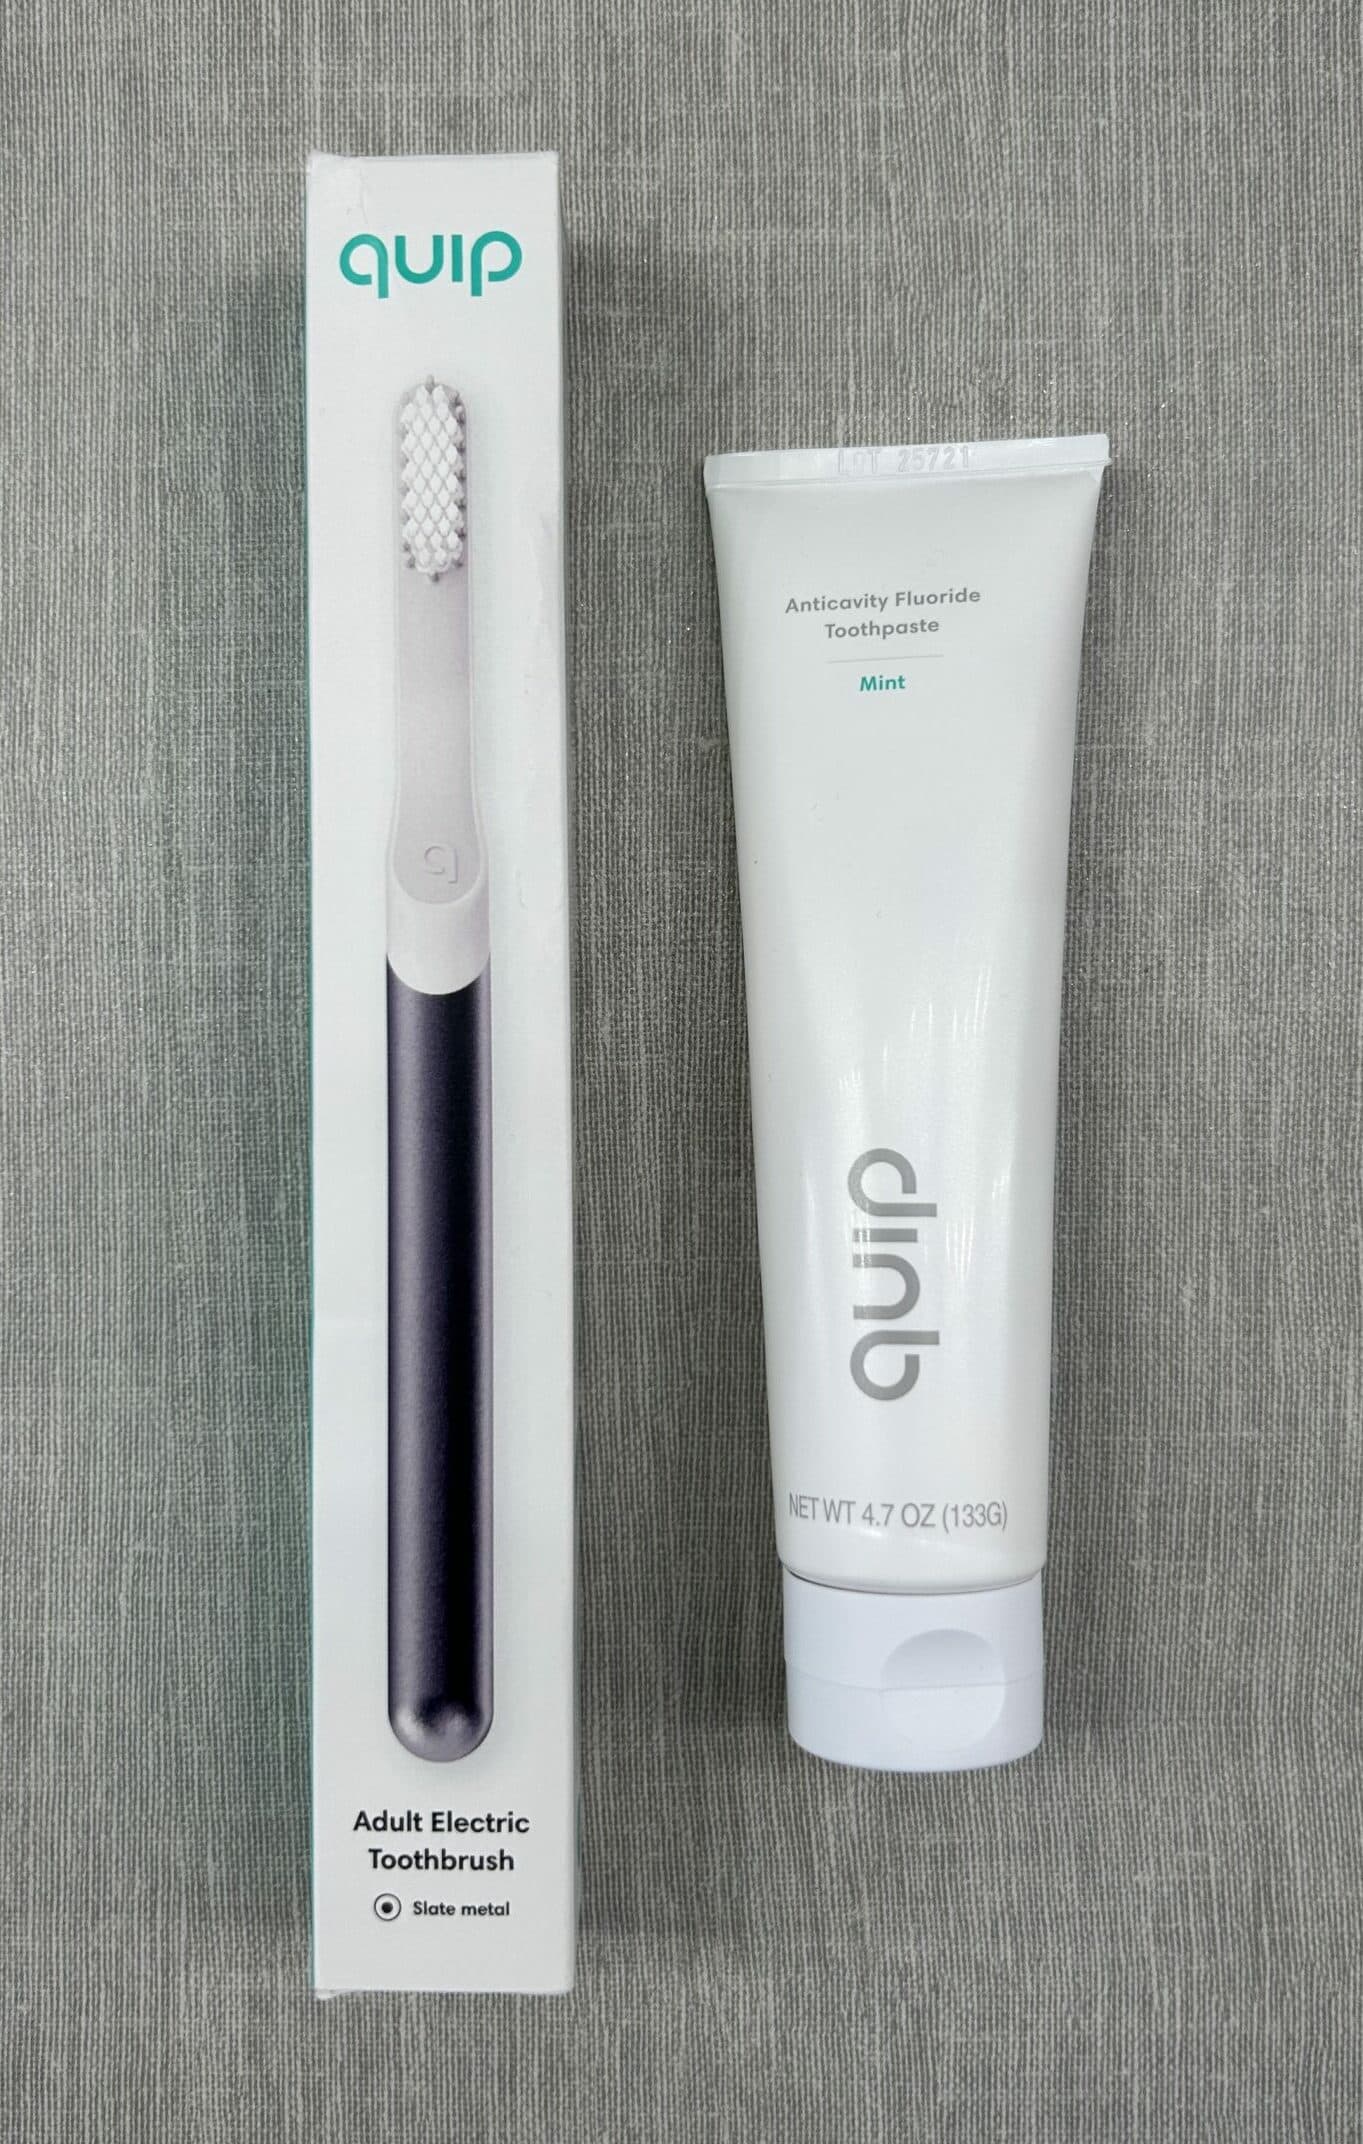 Quip Electric Toothbrush Review | My Dental Advocate